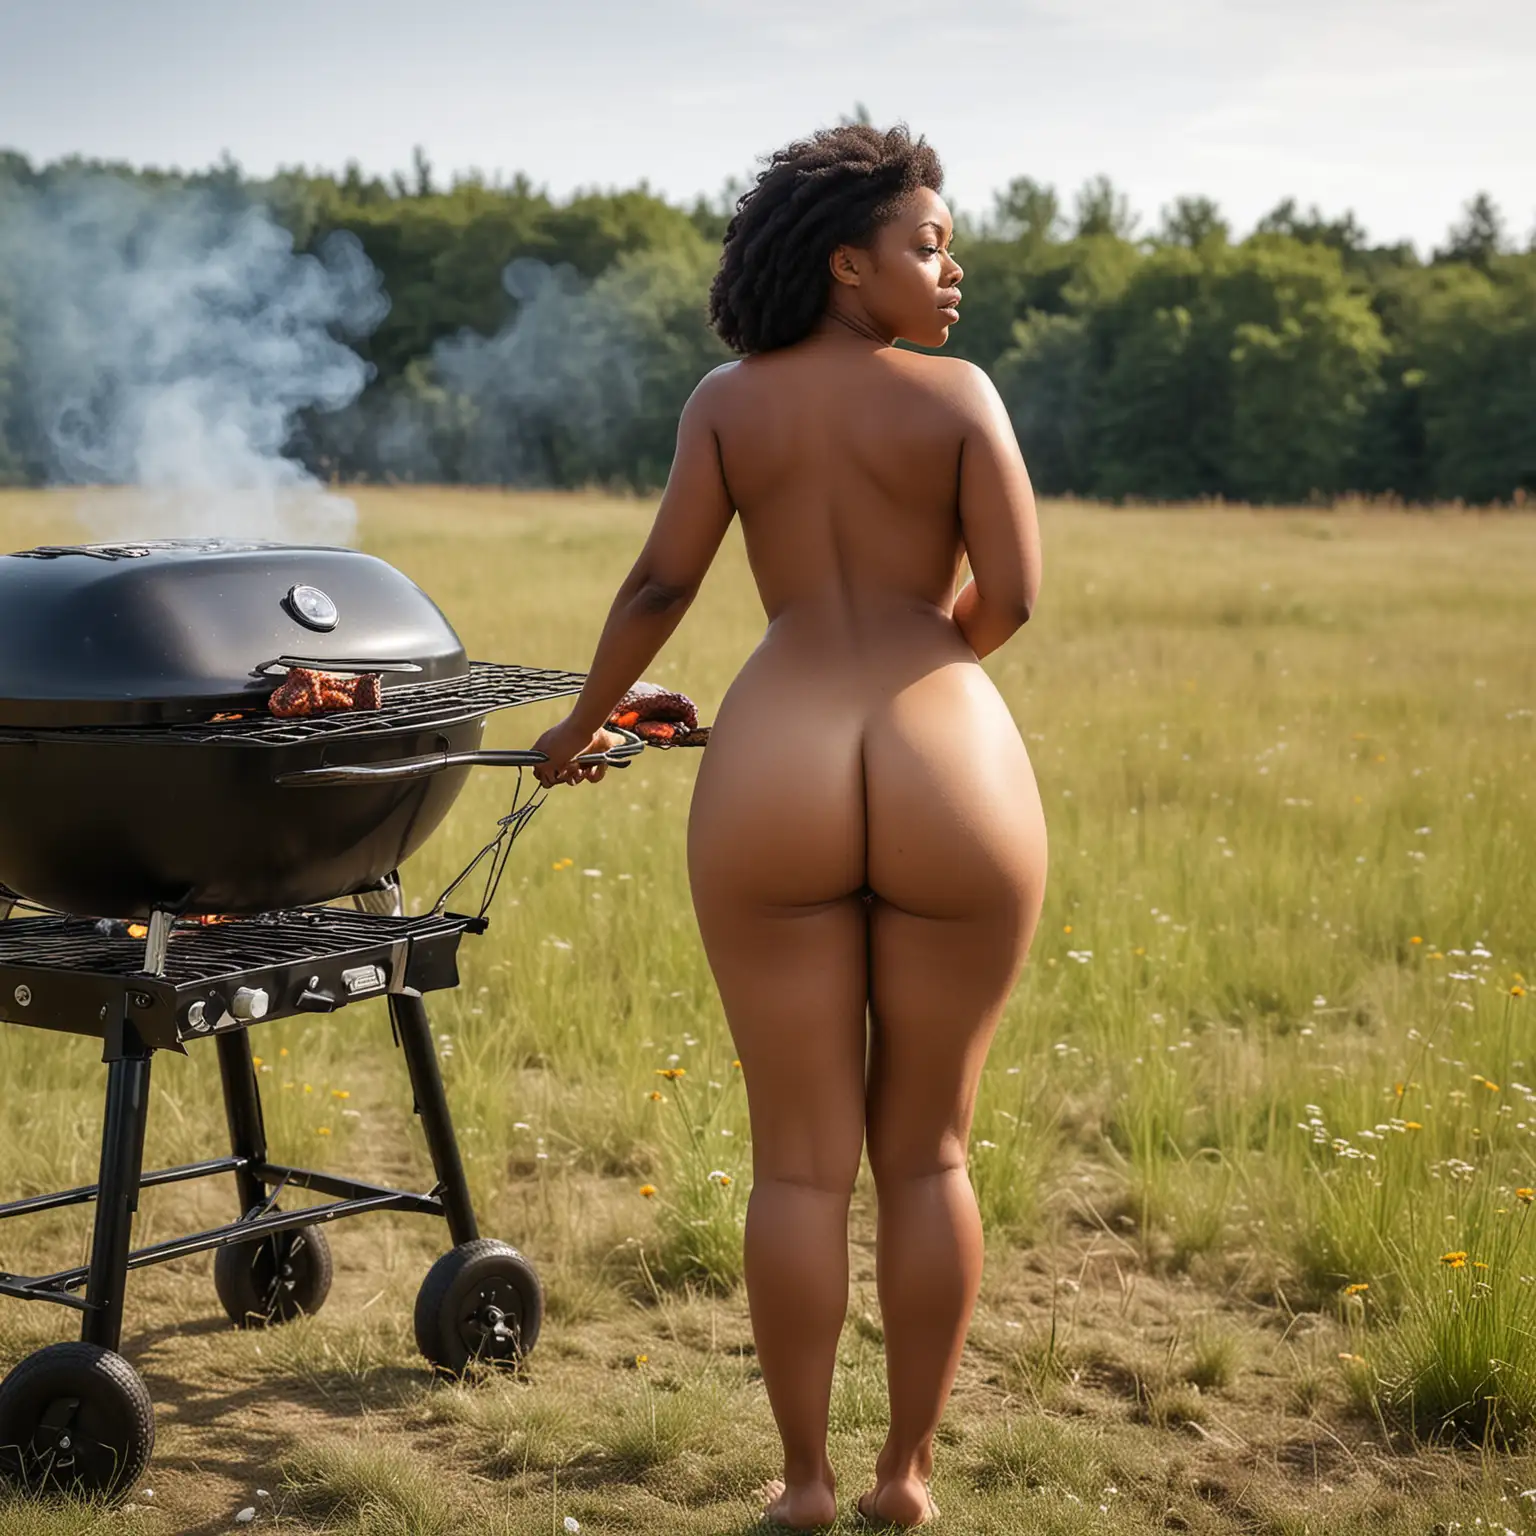 Totally nude, large breasted, bubble butt, black female standing near a very large barbecue grill in a meadow 